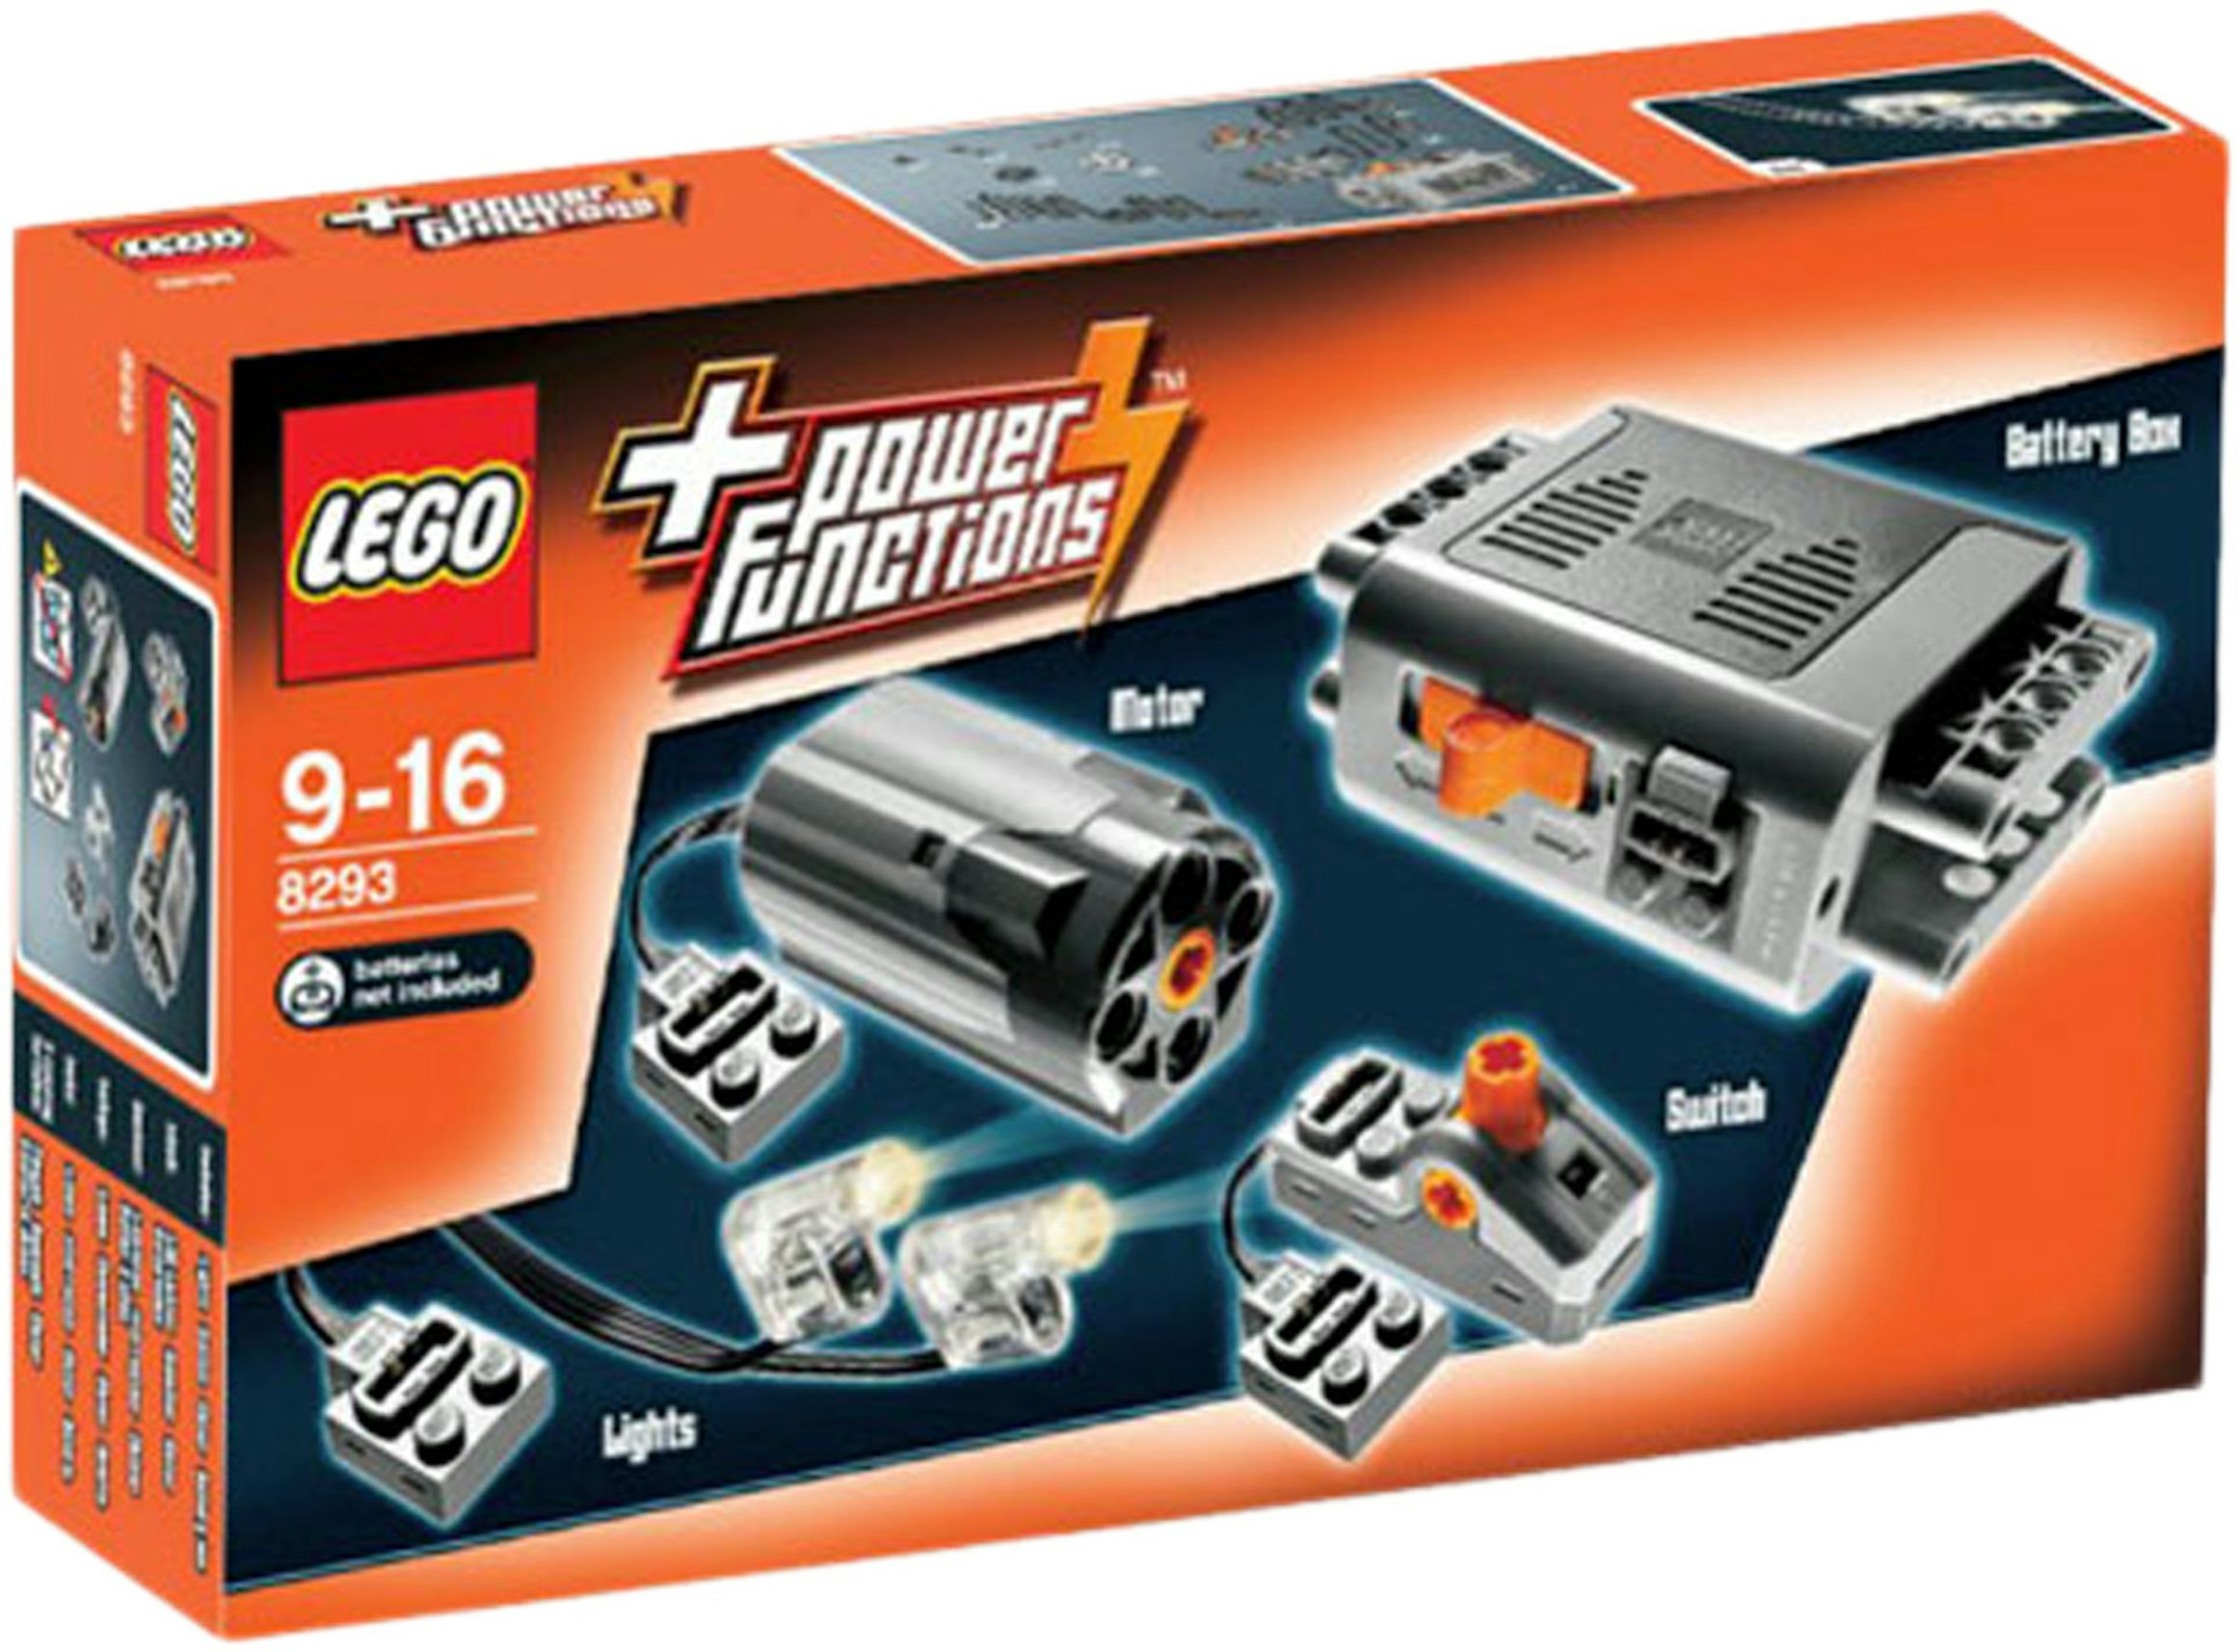  LEGO Technic Power Functions Motor Set 8293 (10 Pieces)  (Discontinued by Manufacturer) : Toys & Games